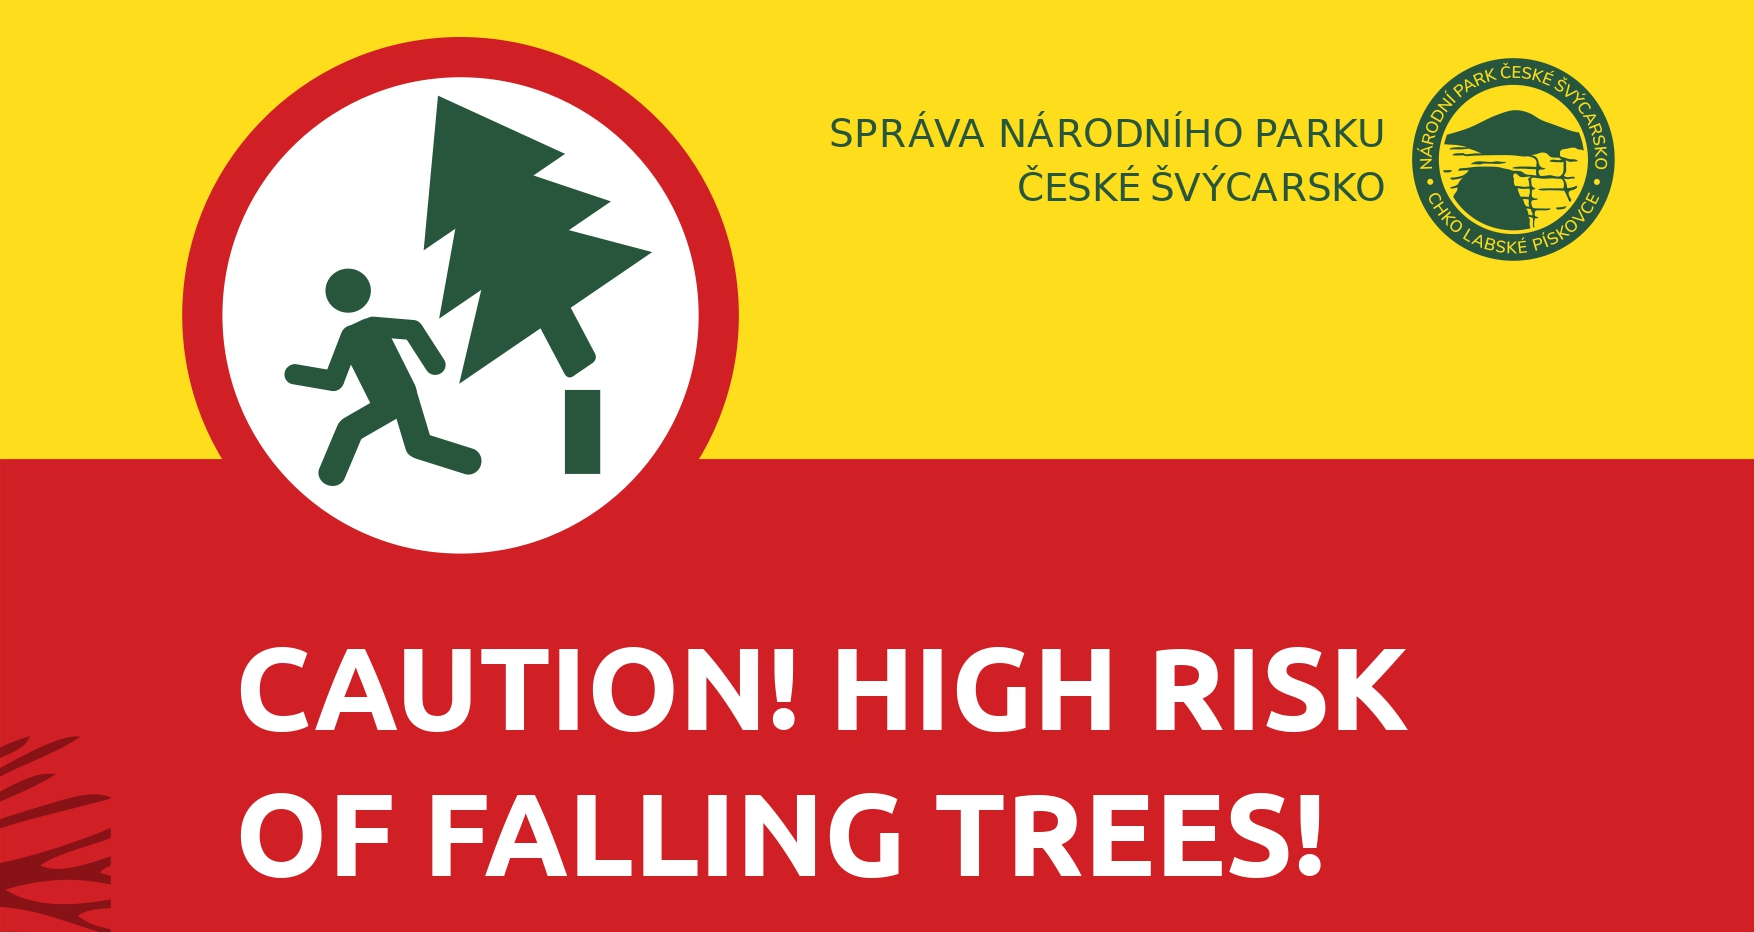 Caution, danger of falling trees